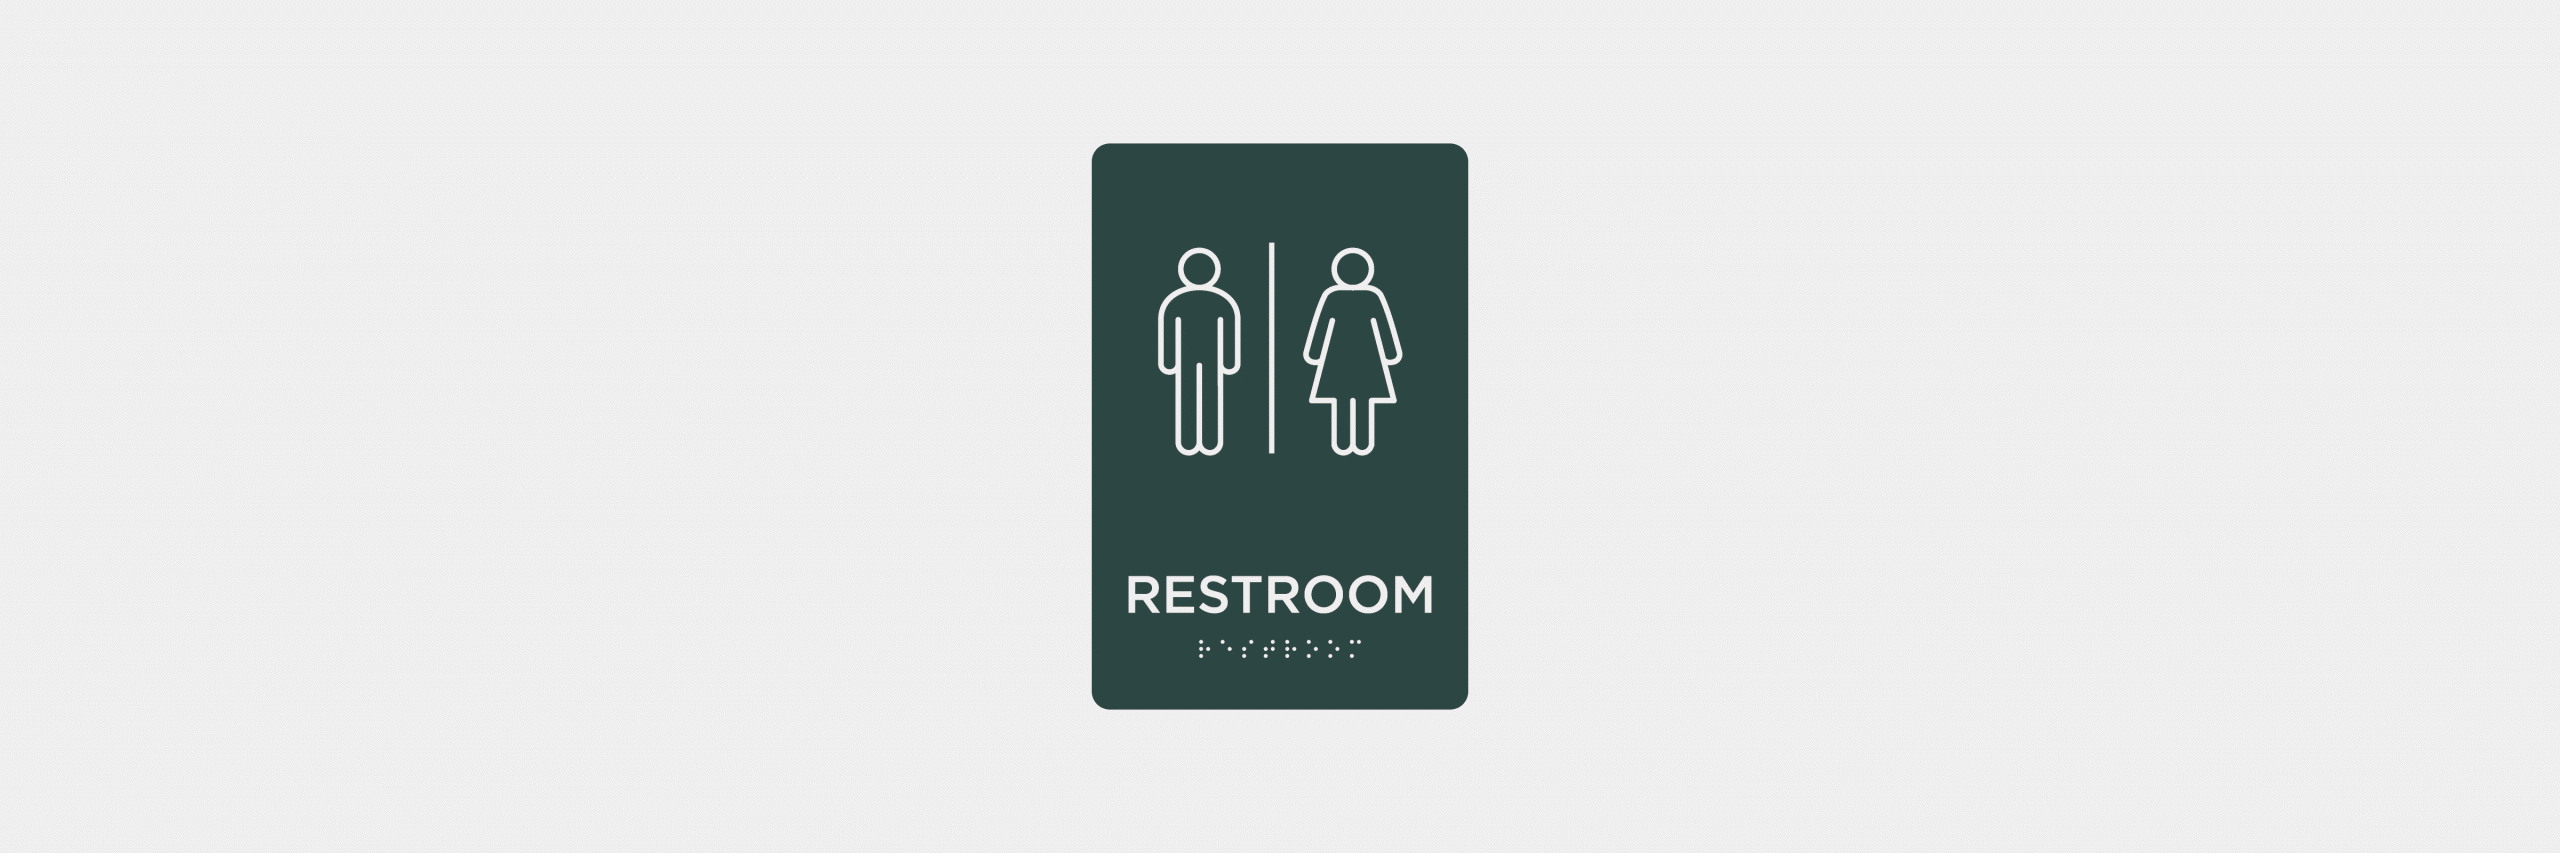 ADA Signs - Restroom Pictogram and Typesetting Braille